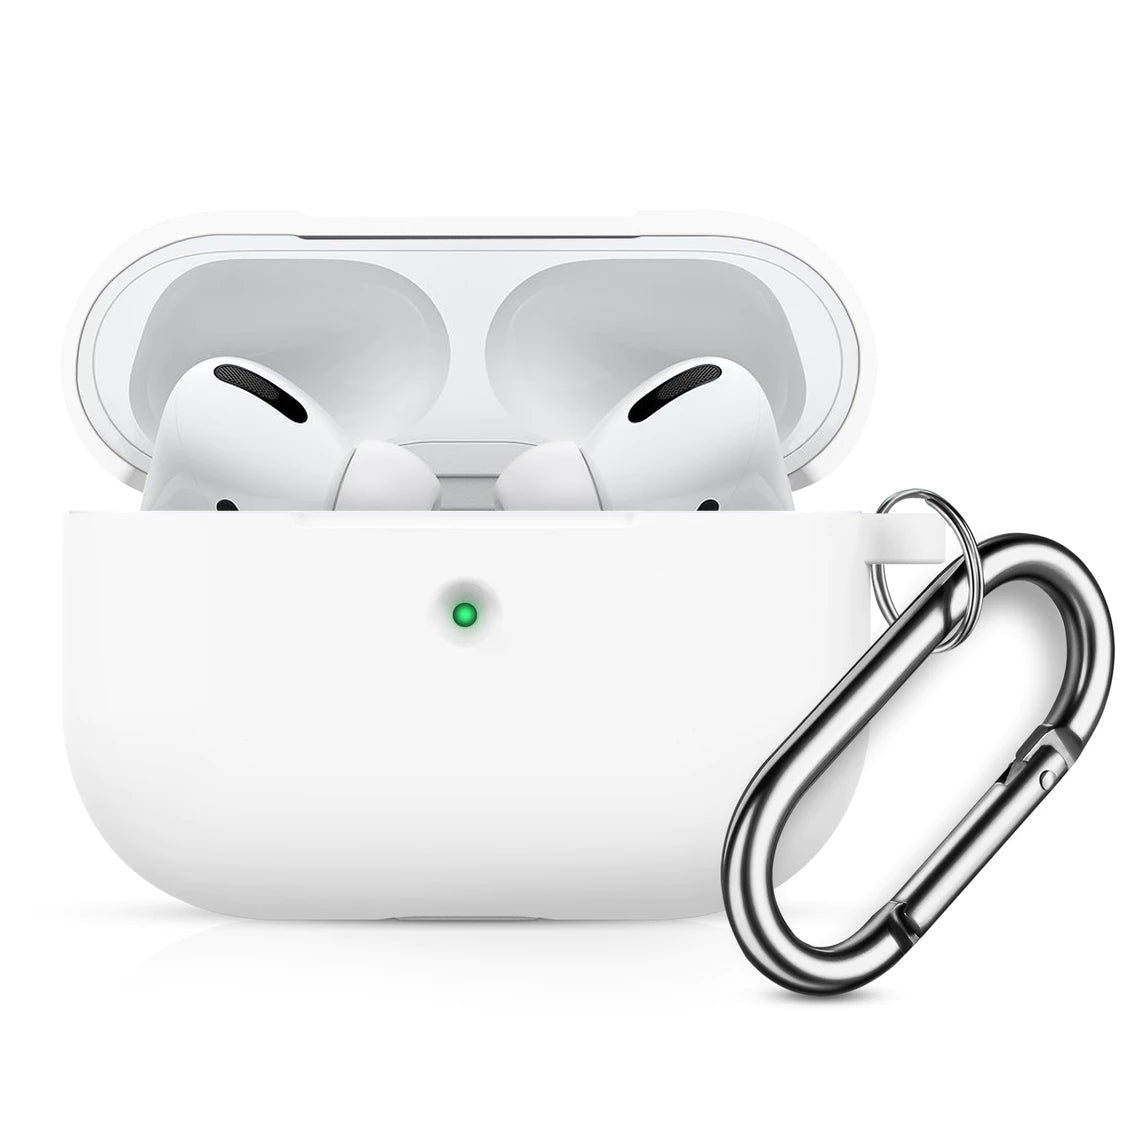 For AirPods Pro Case Wireless Bluetooth Earphone Protective For AirPods Pro Silicone Cover headphone Accessories With Carabiner